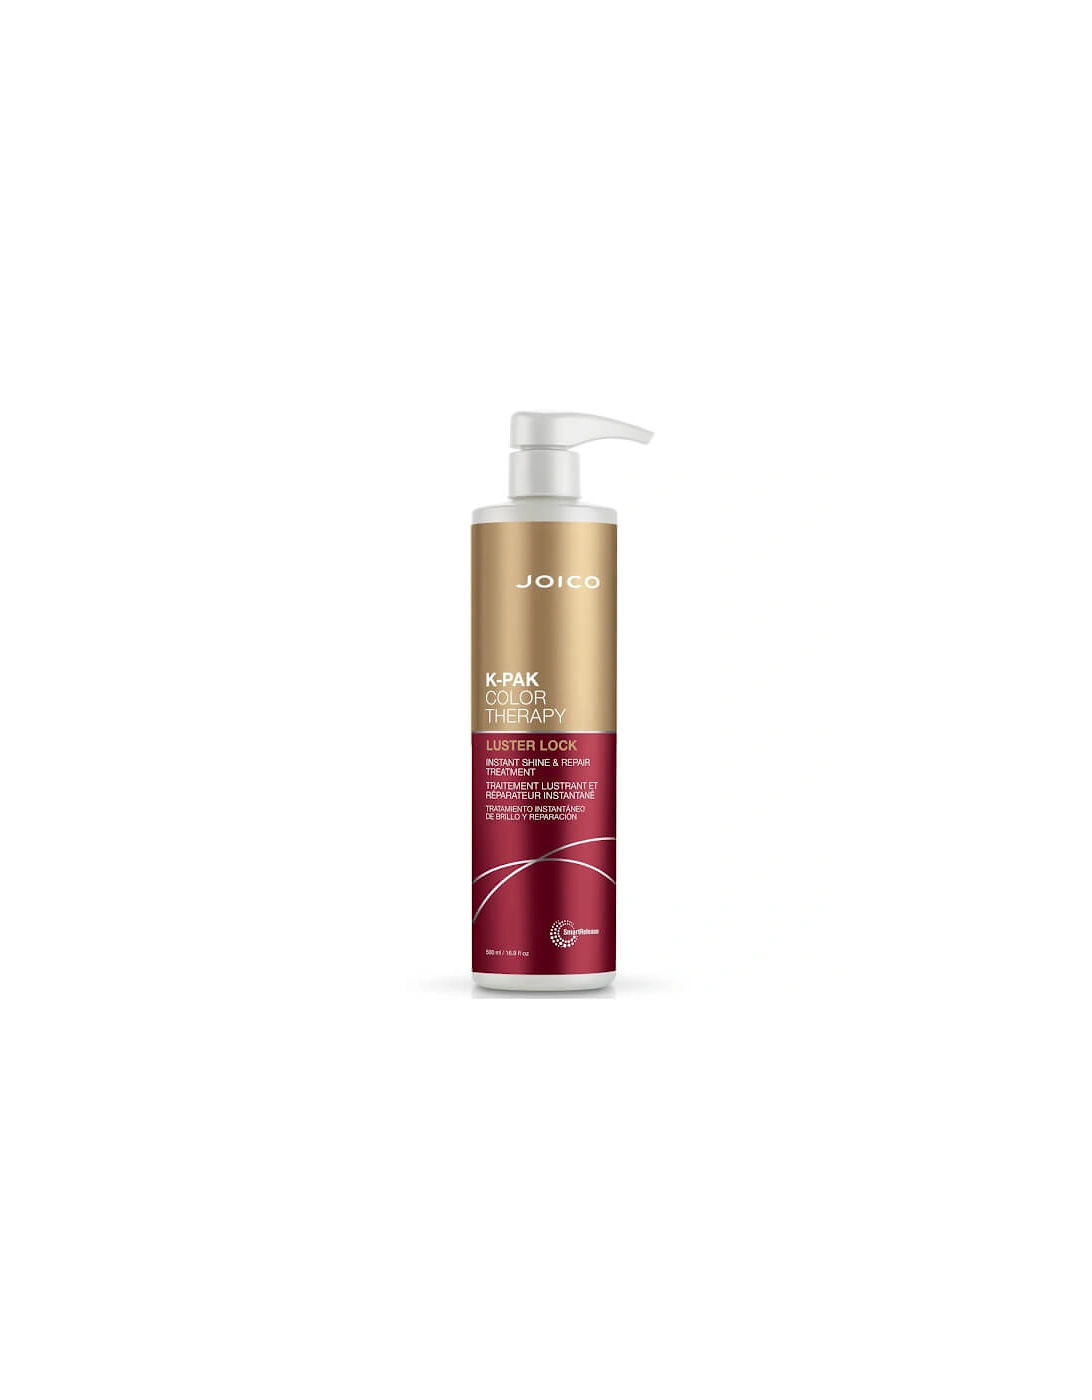 K-Pak Colour Therapy Luster Lock Instant Shine and Repair Treatment 500ml (Worth £84.00), 2 of 1